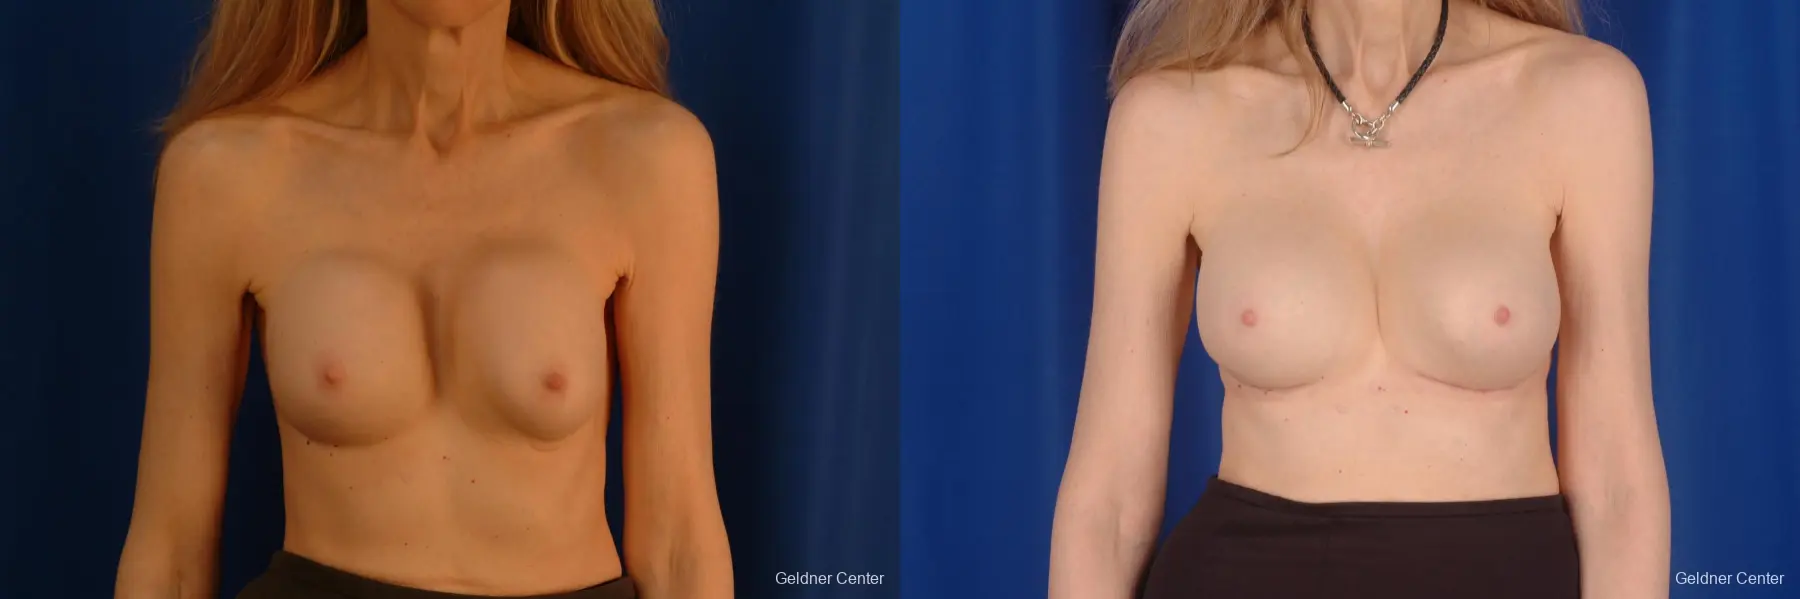 Complex Breast Augmentation Hinsdale, Chicago 2398 - Before and After 1